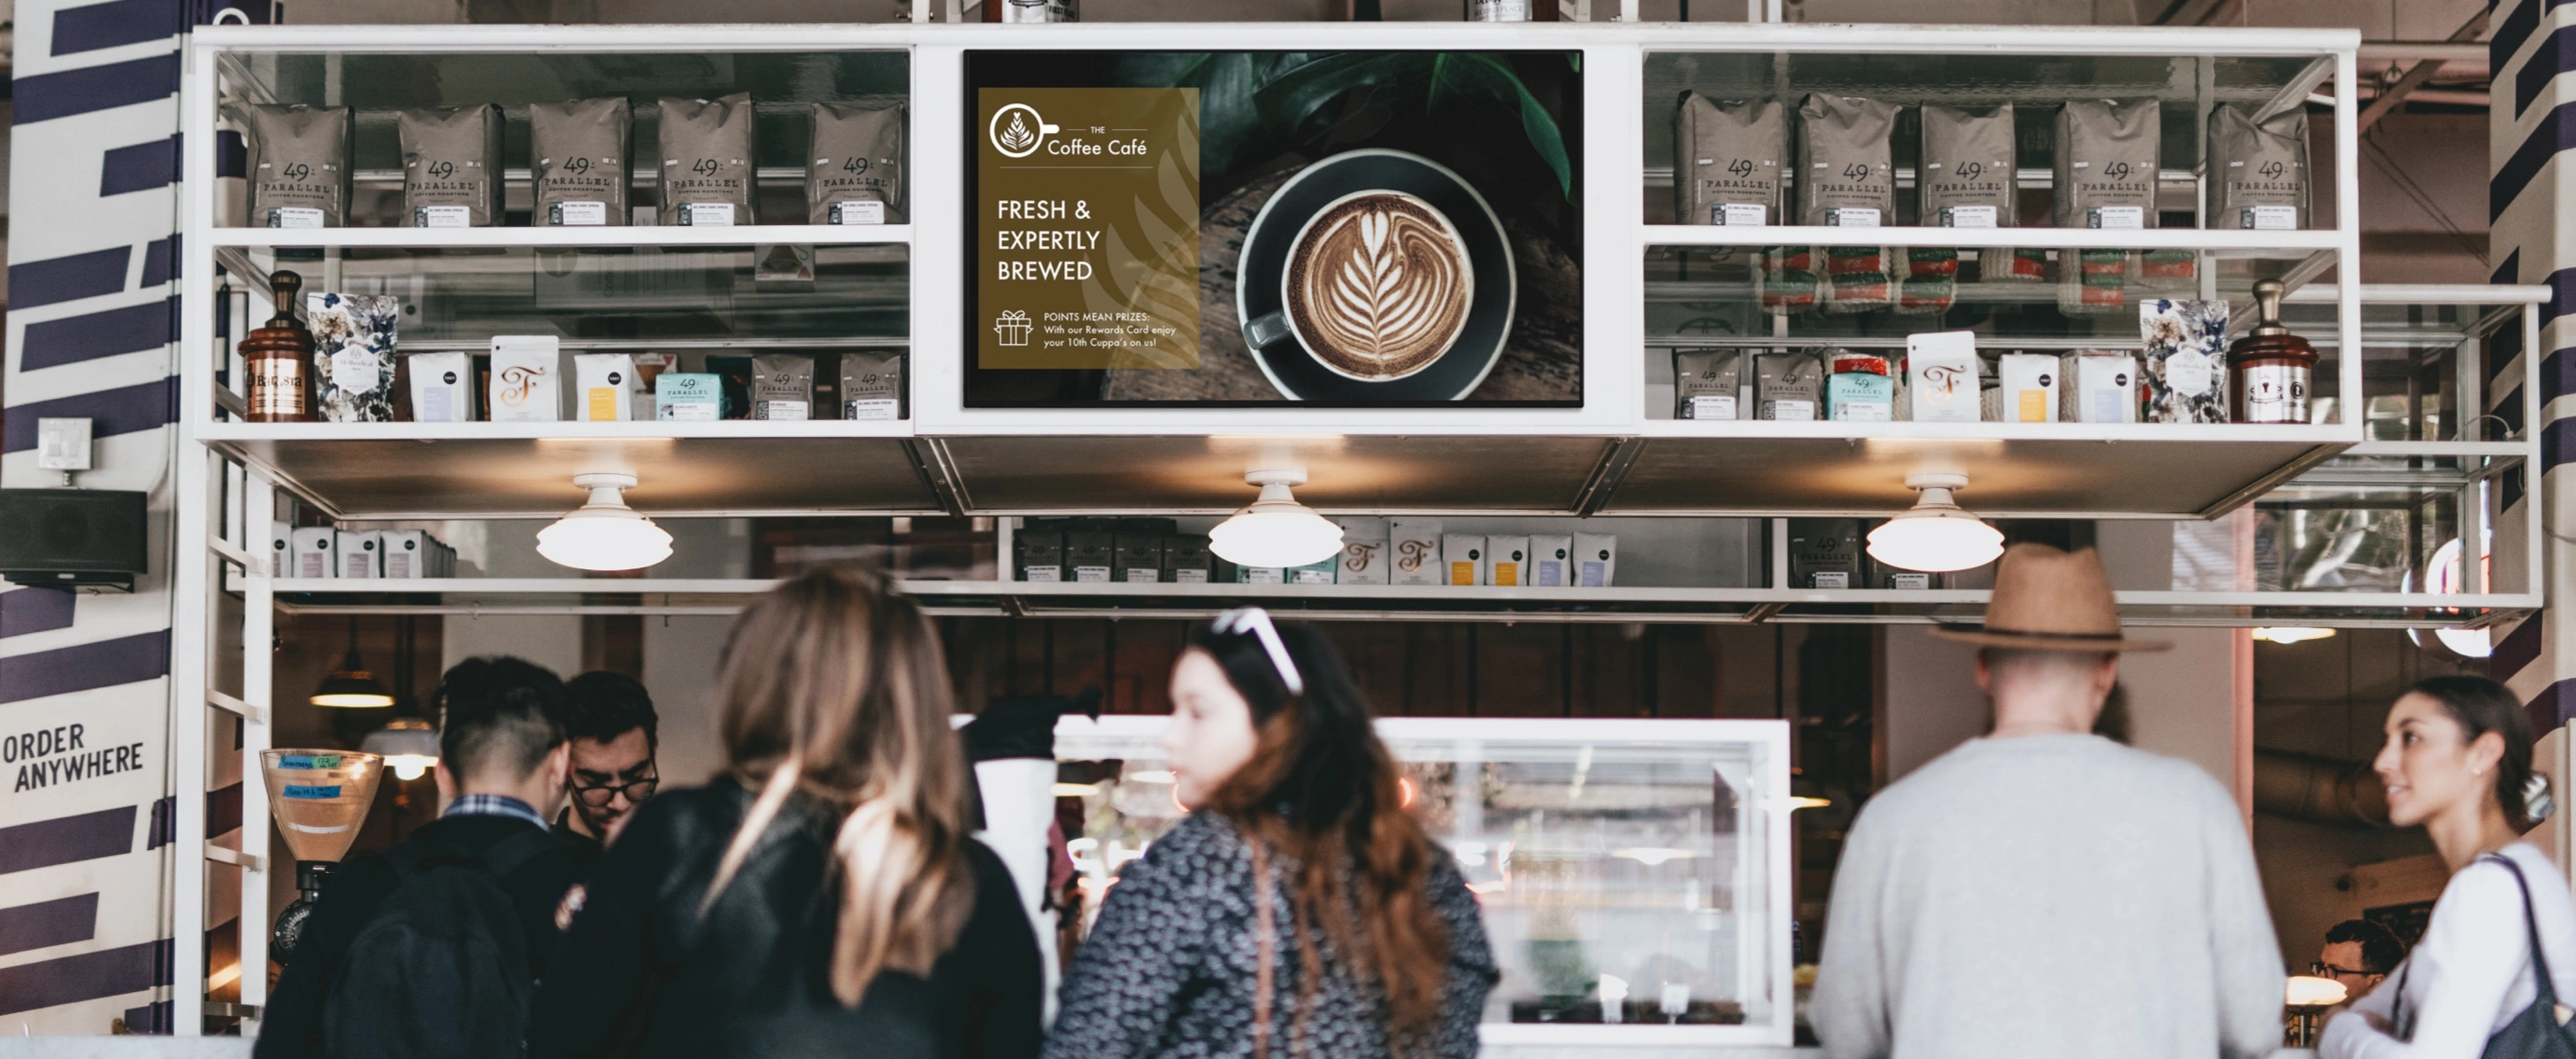 CM Series display screen showing rewards card information in a coffee shop